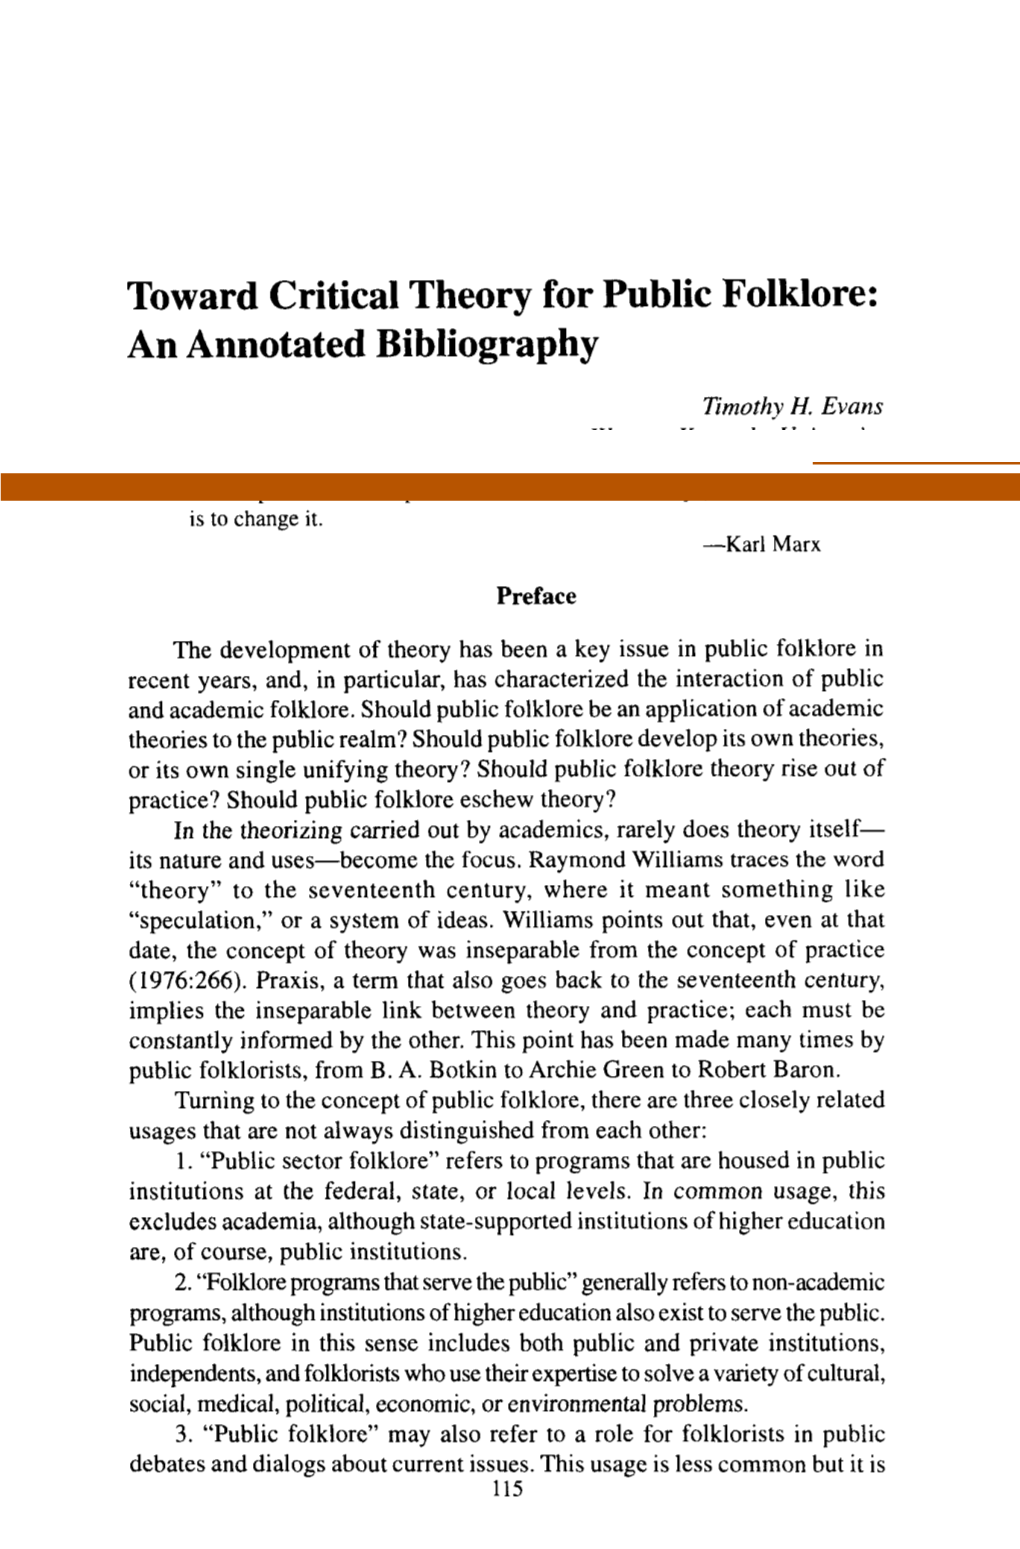 Toward Critical Theory for Public Folklore: an Annotated Bibliography